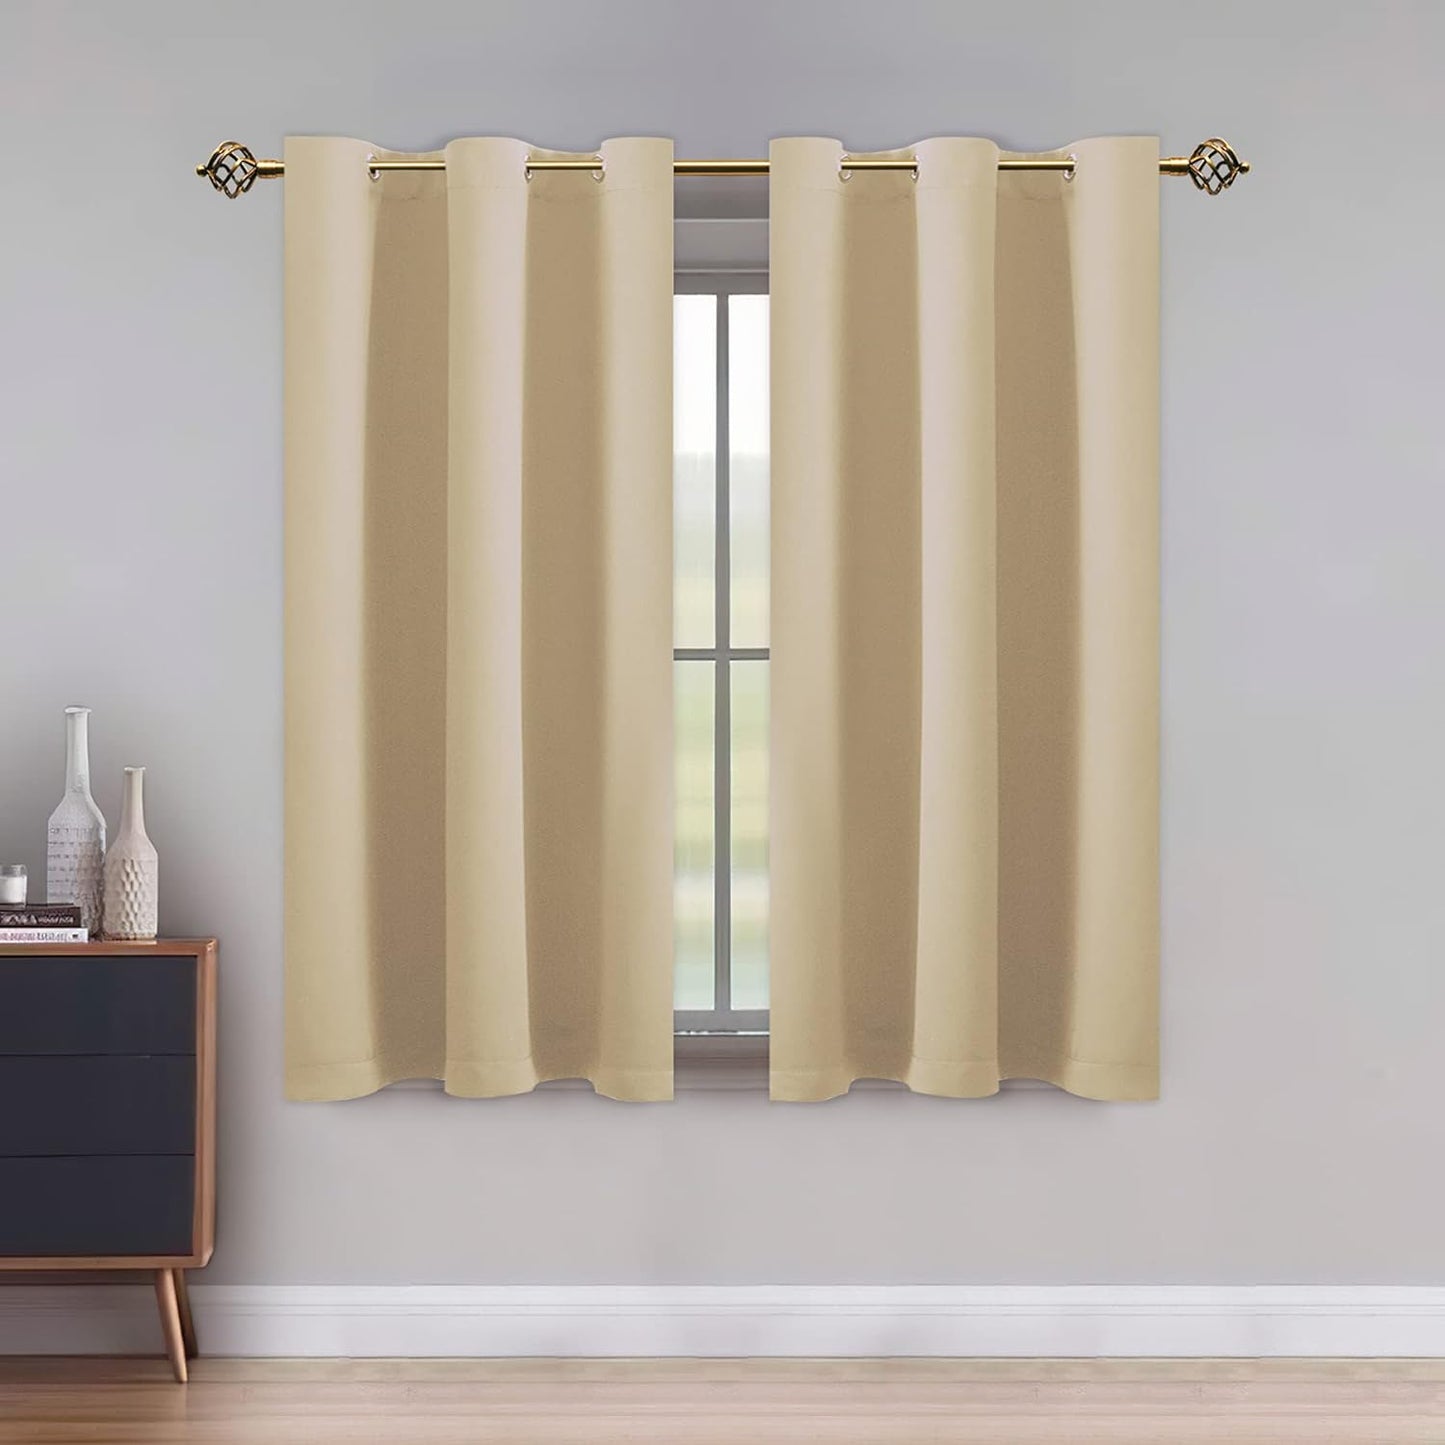 LUSHLEAF Blackout Curtains for Bedroom, Solid Thermal Insulated with Grommet Noise Reduction Window Drapes, Room Darkening Curtains for Living Room, 2 Panels, 52 X 63 Inch Grey  SHEEROOM Beige 42 X 45 Inch 